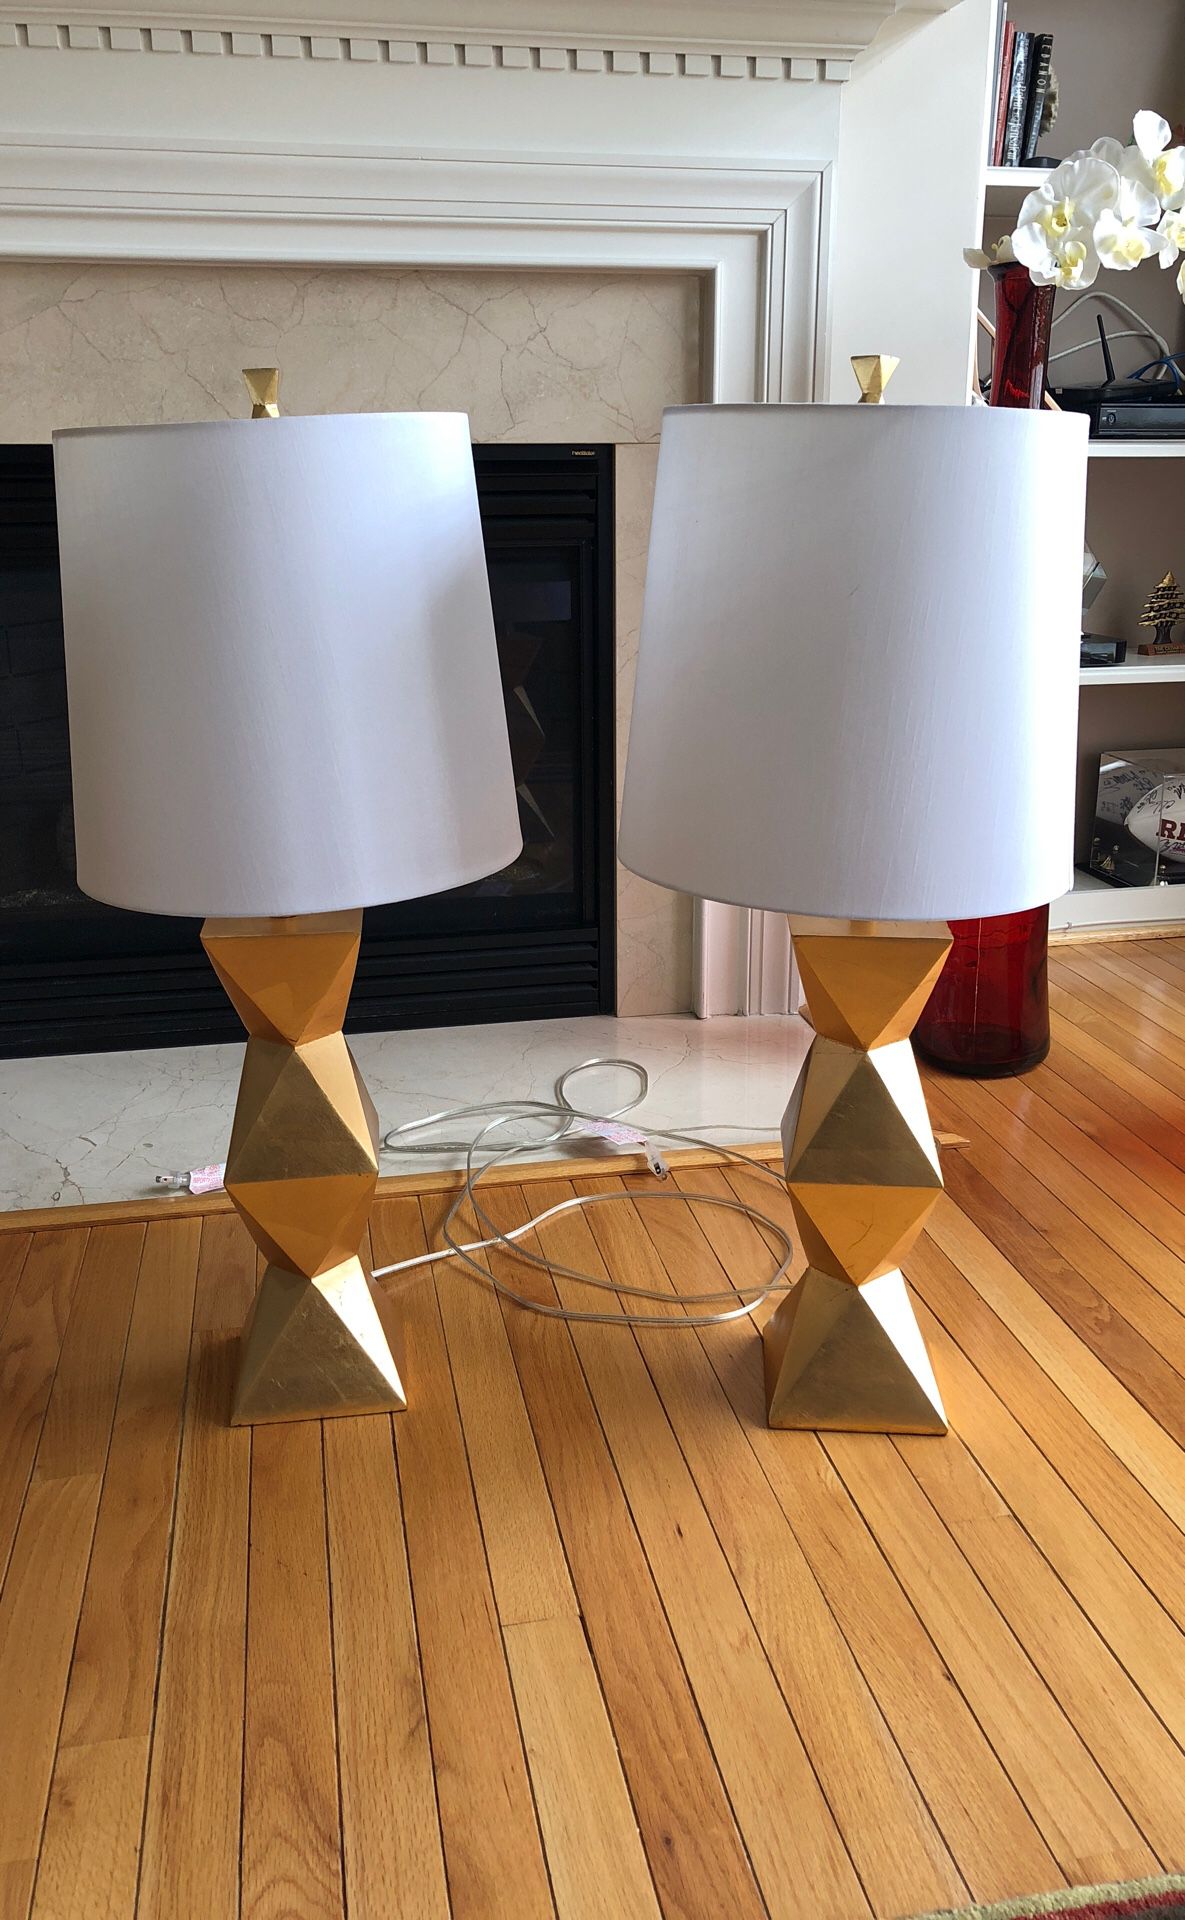 2 Table lamps new collection almost brand new